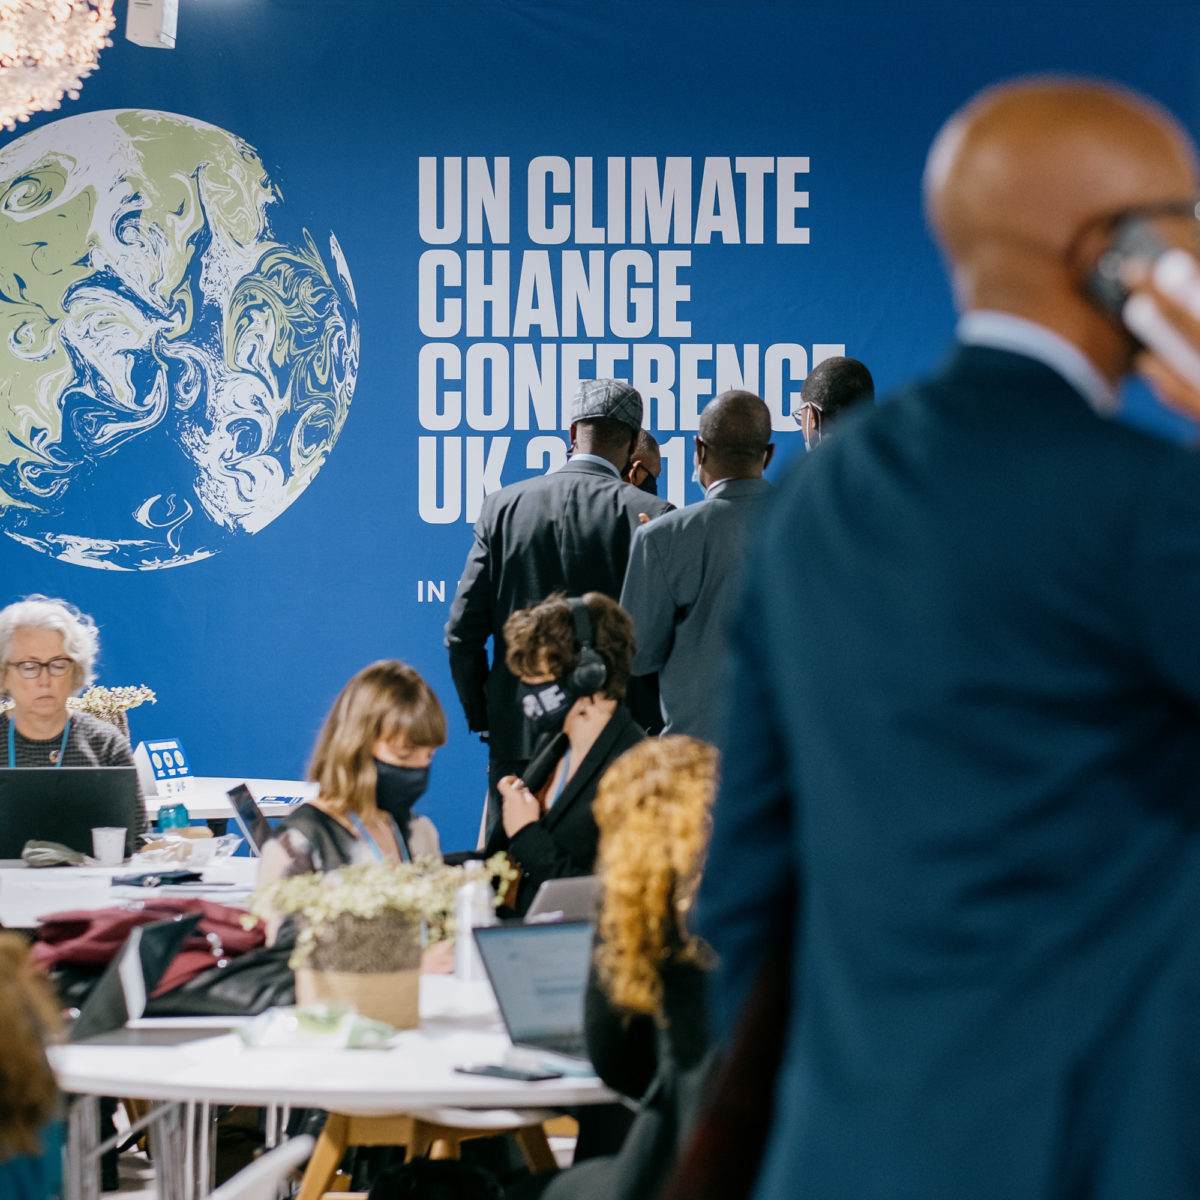 People working at COP26